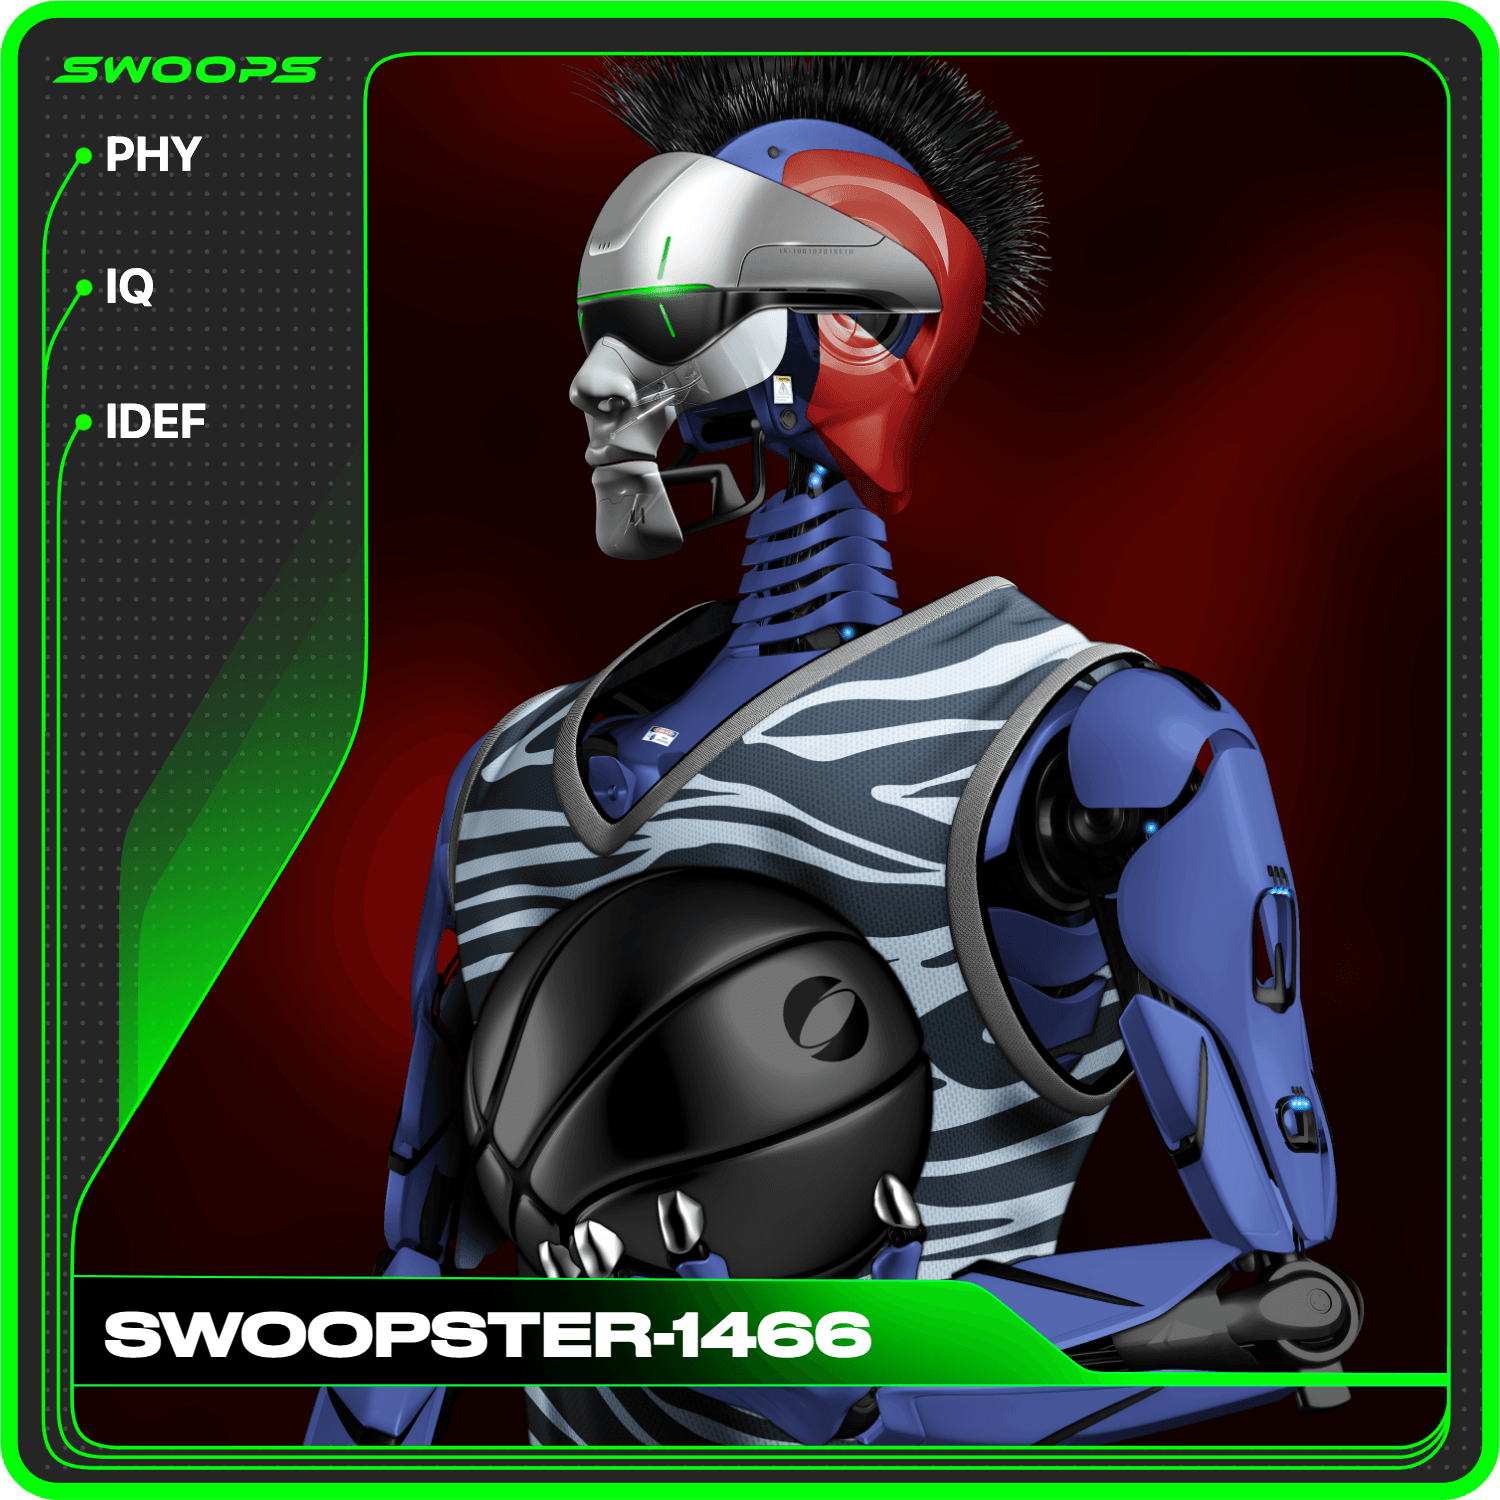 SWOOPSTER-1466